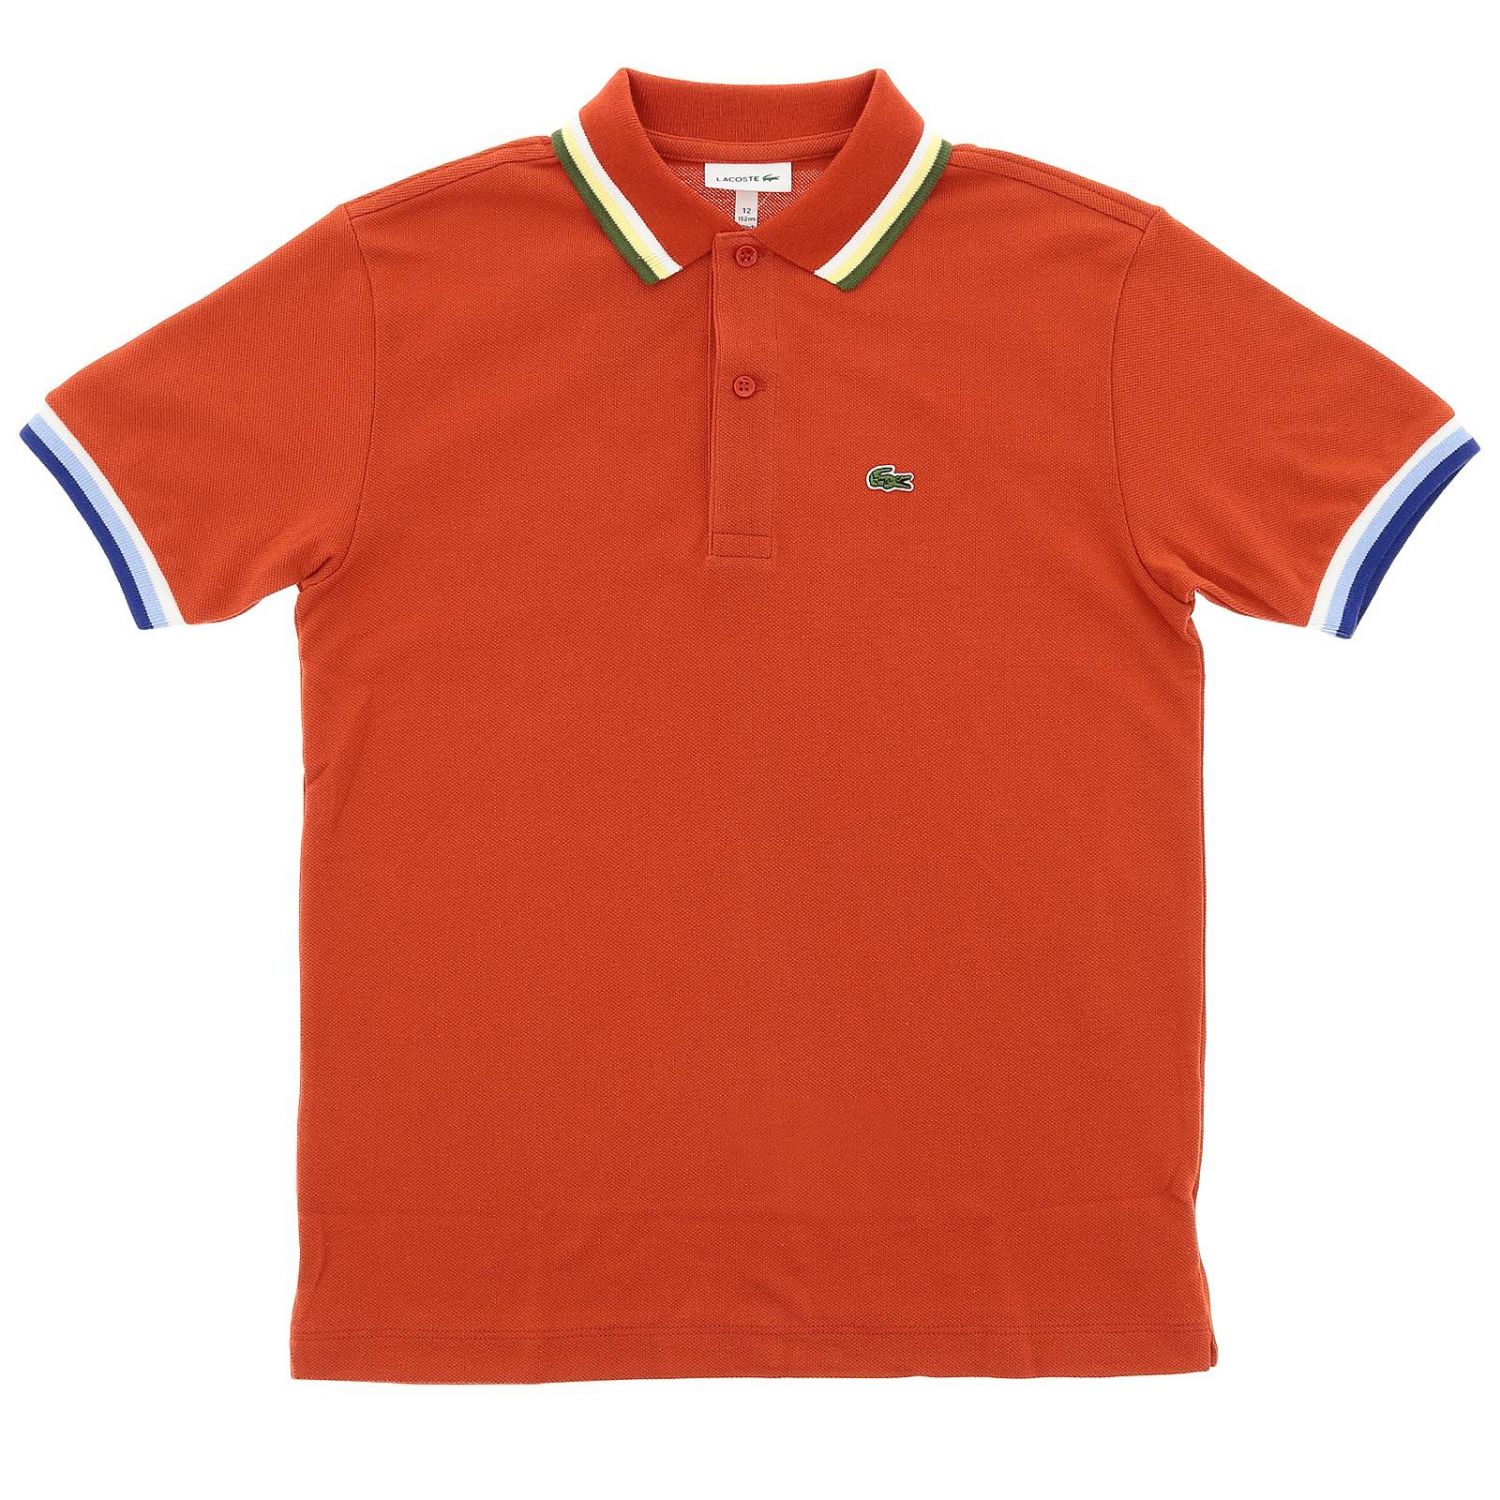 toddler lacoste t shirts